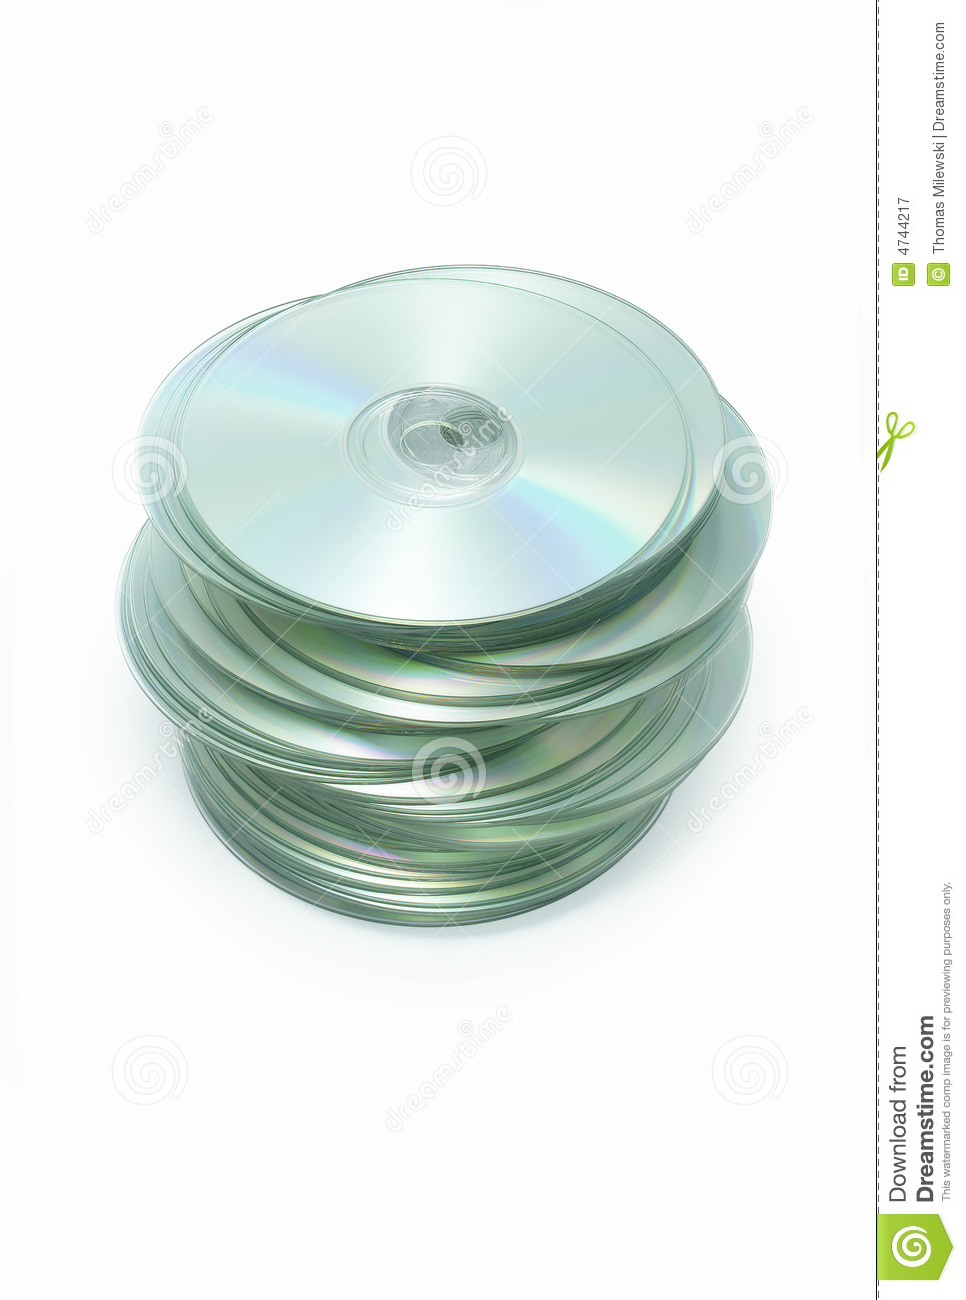 Messy Stack Of Cd Disks On White Royalty Free Stock Photography    